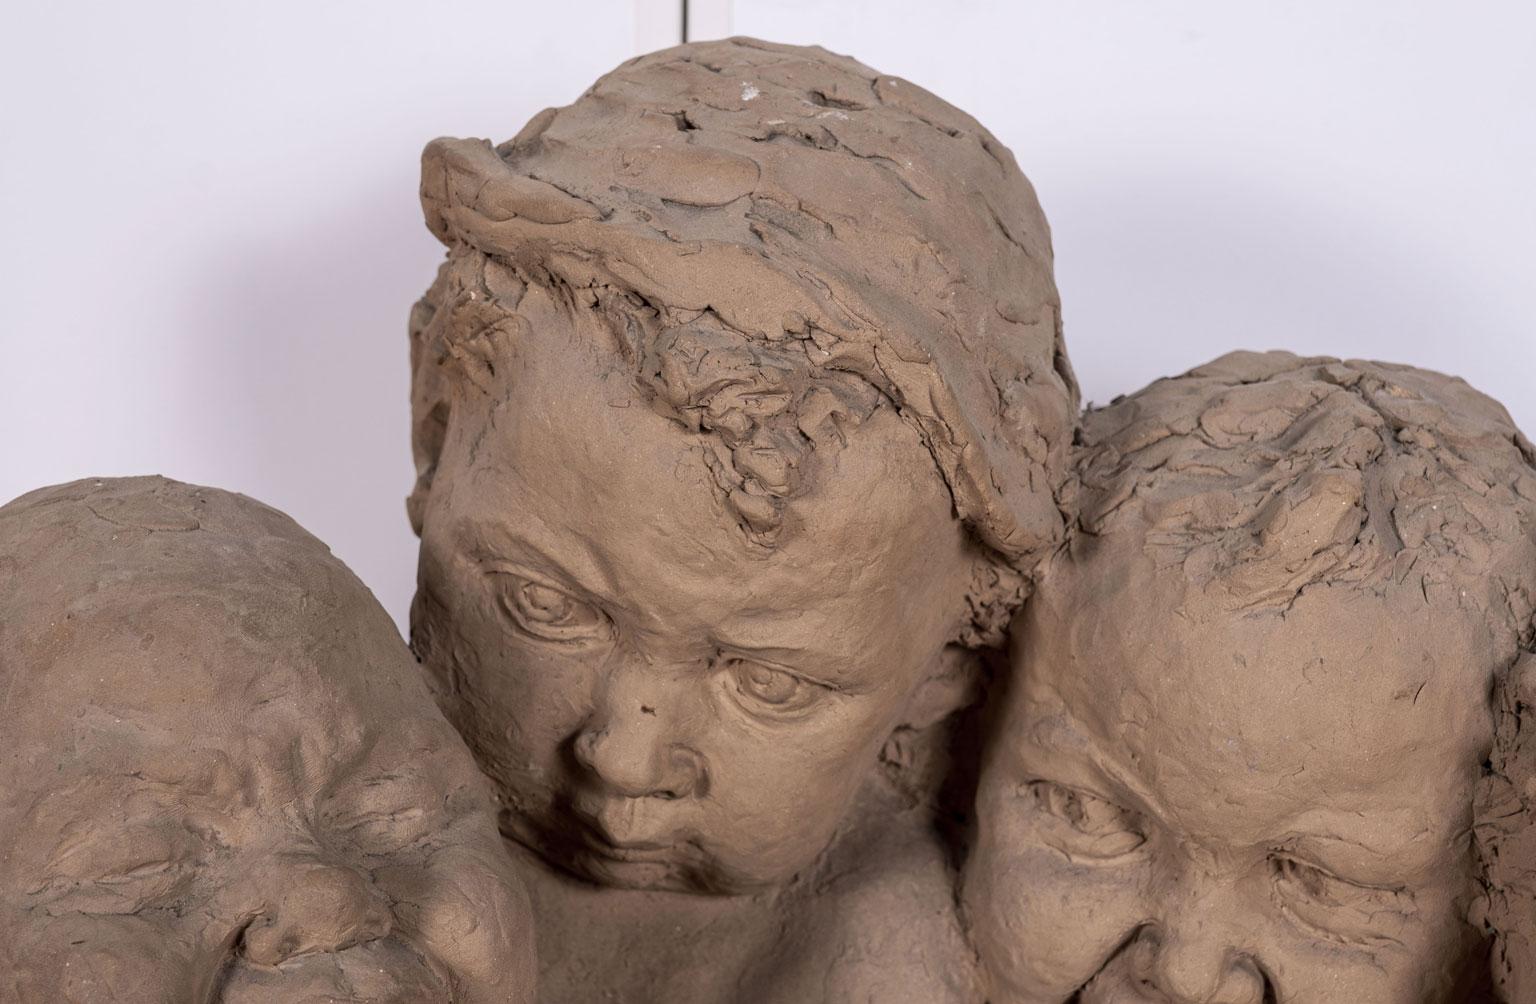 crying baby sculpture